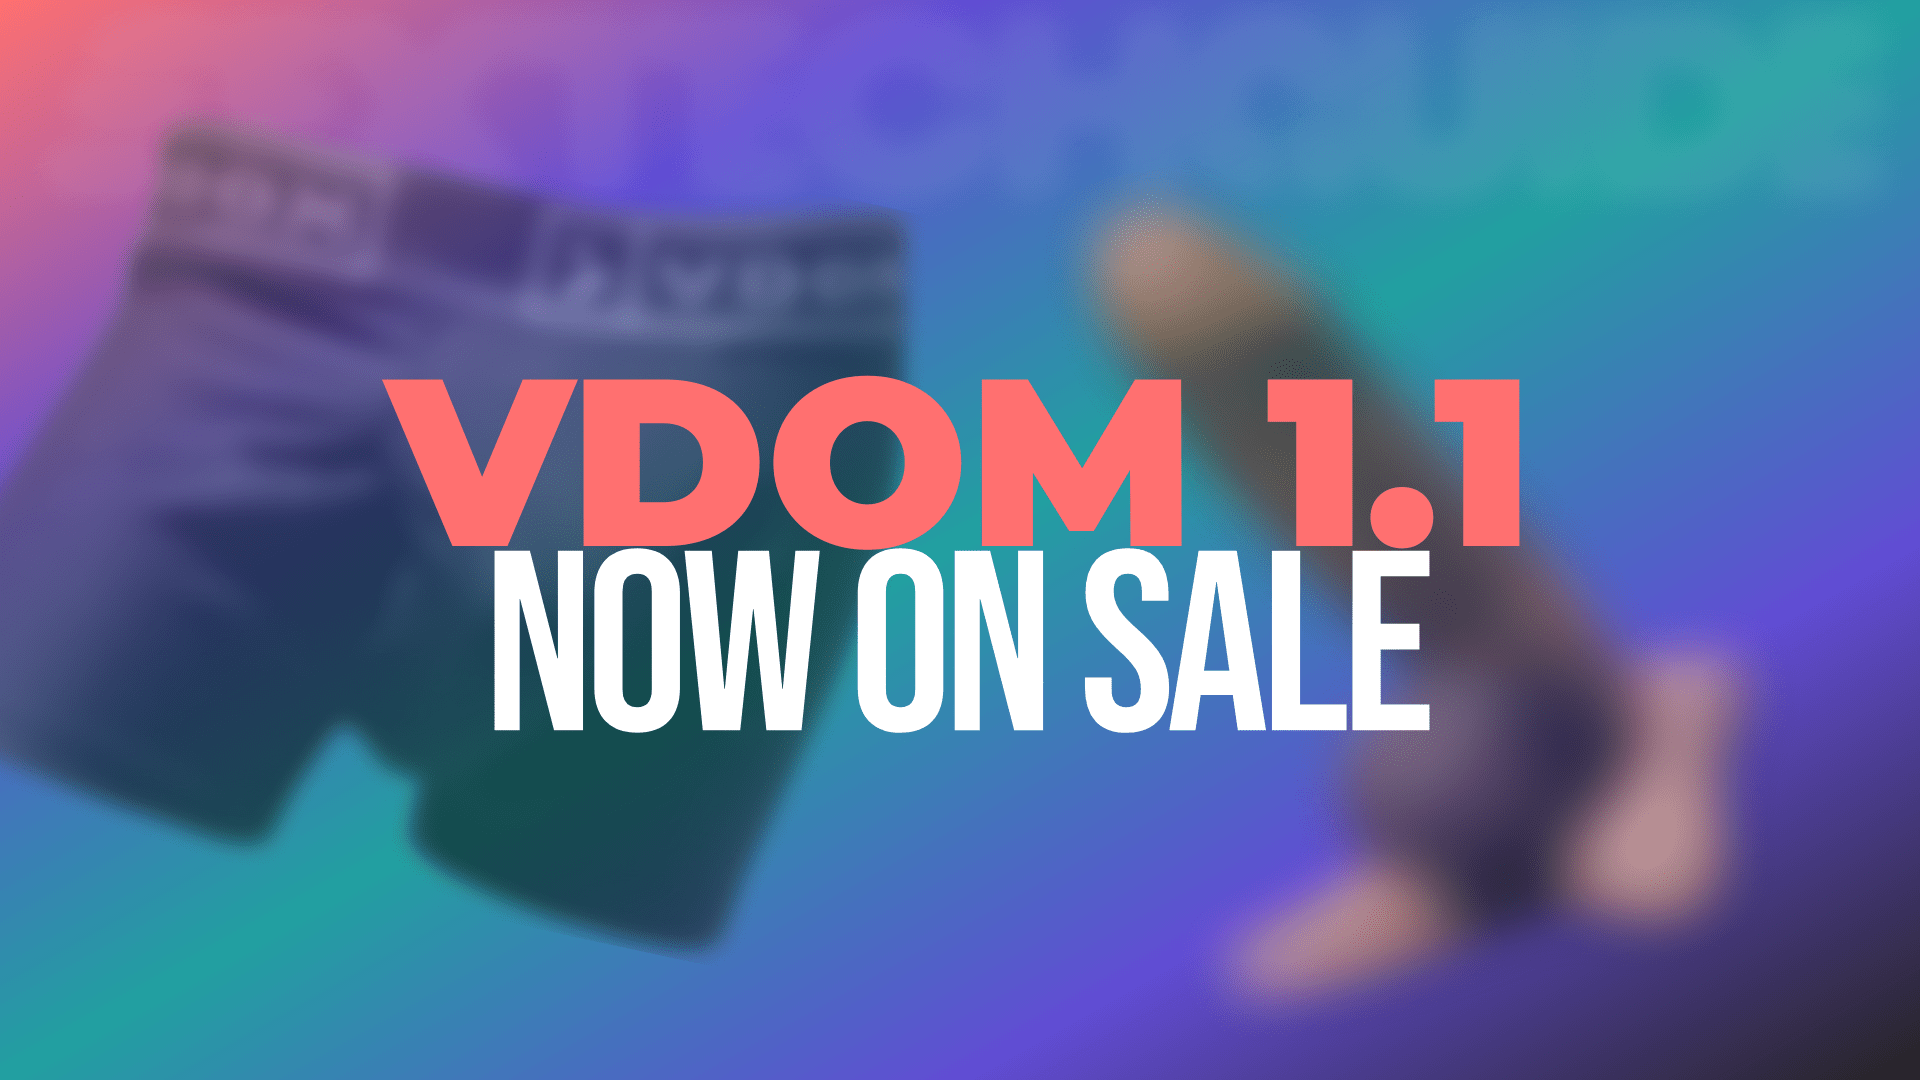 Www Xxx Vdom - VDOM v1.1 Smart Wearable Penis Tech Finally Launched